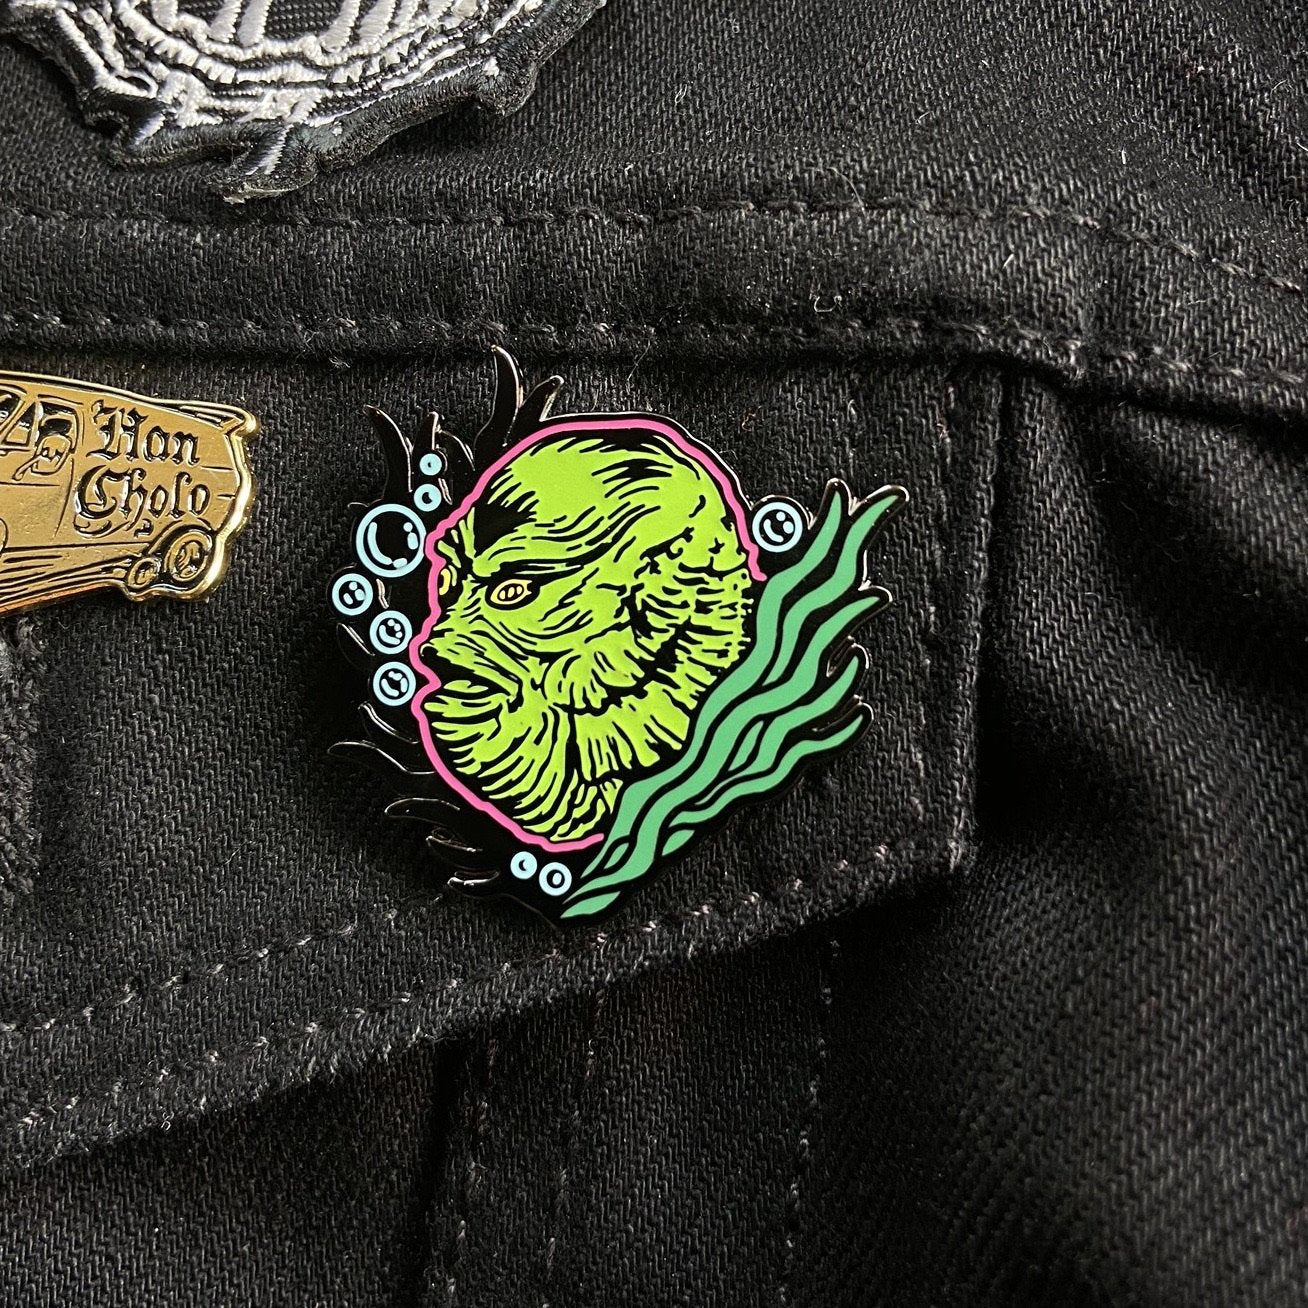 creature from the black lagoon collectible enamel pin